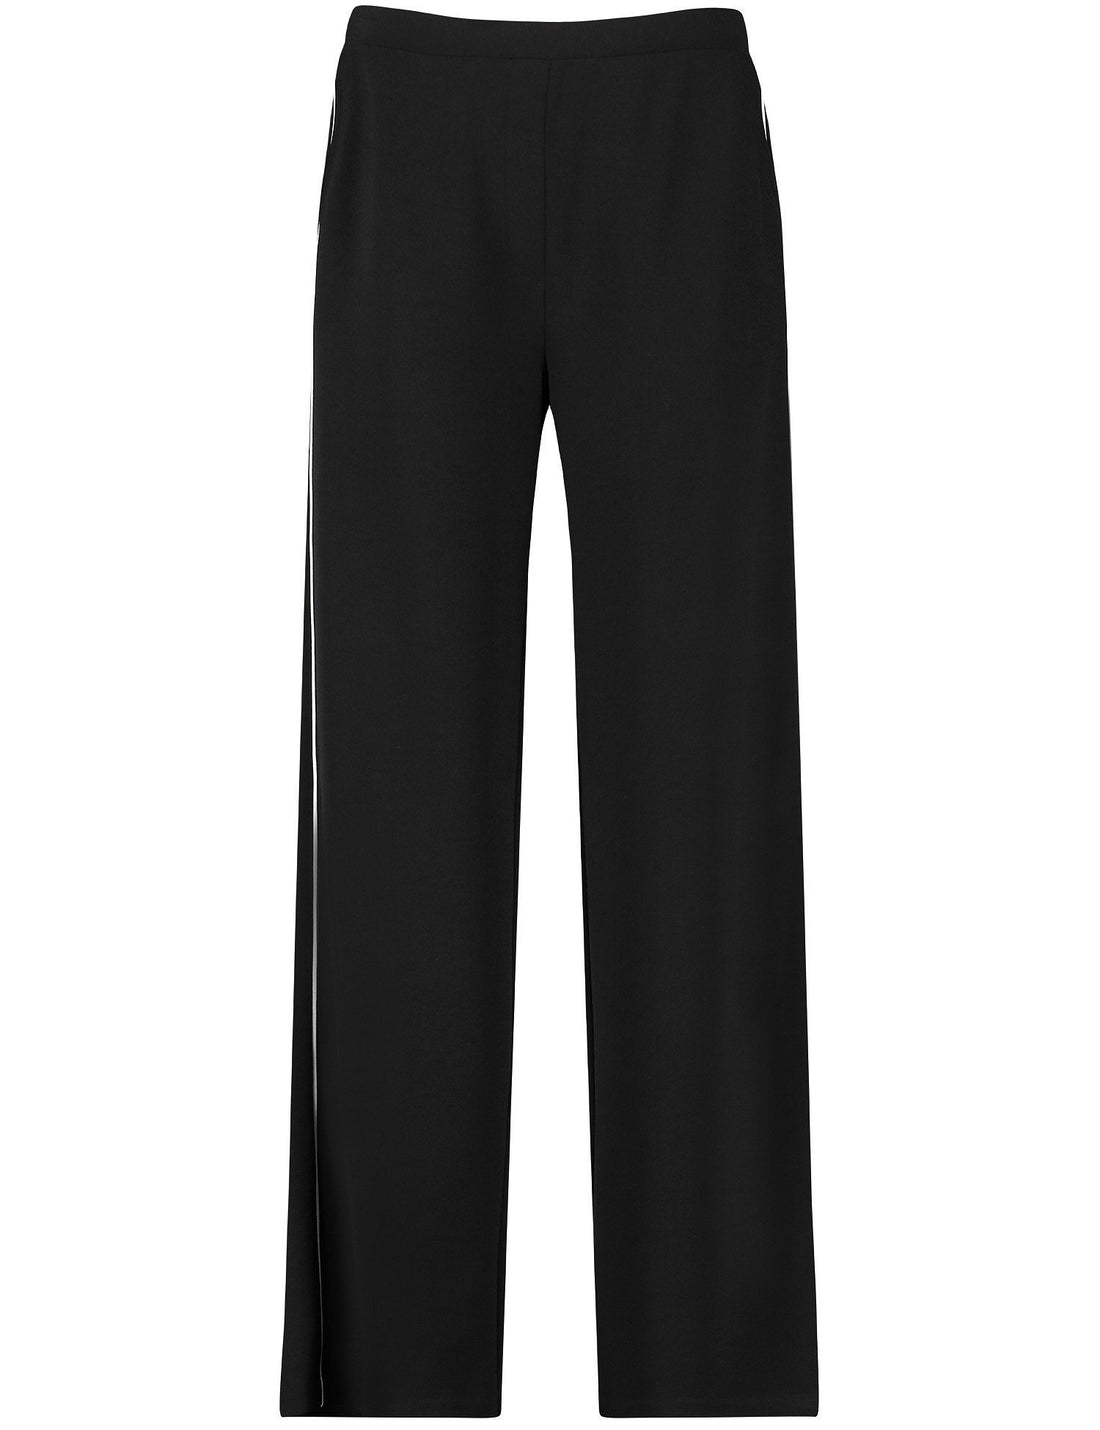 Slip-On Trousers With Side Piping_925009-35031_11000_02